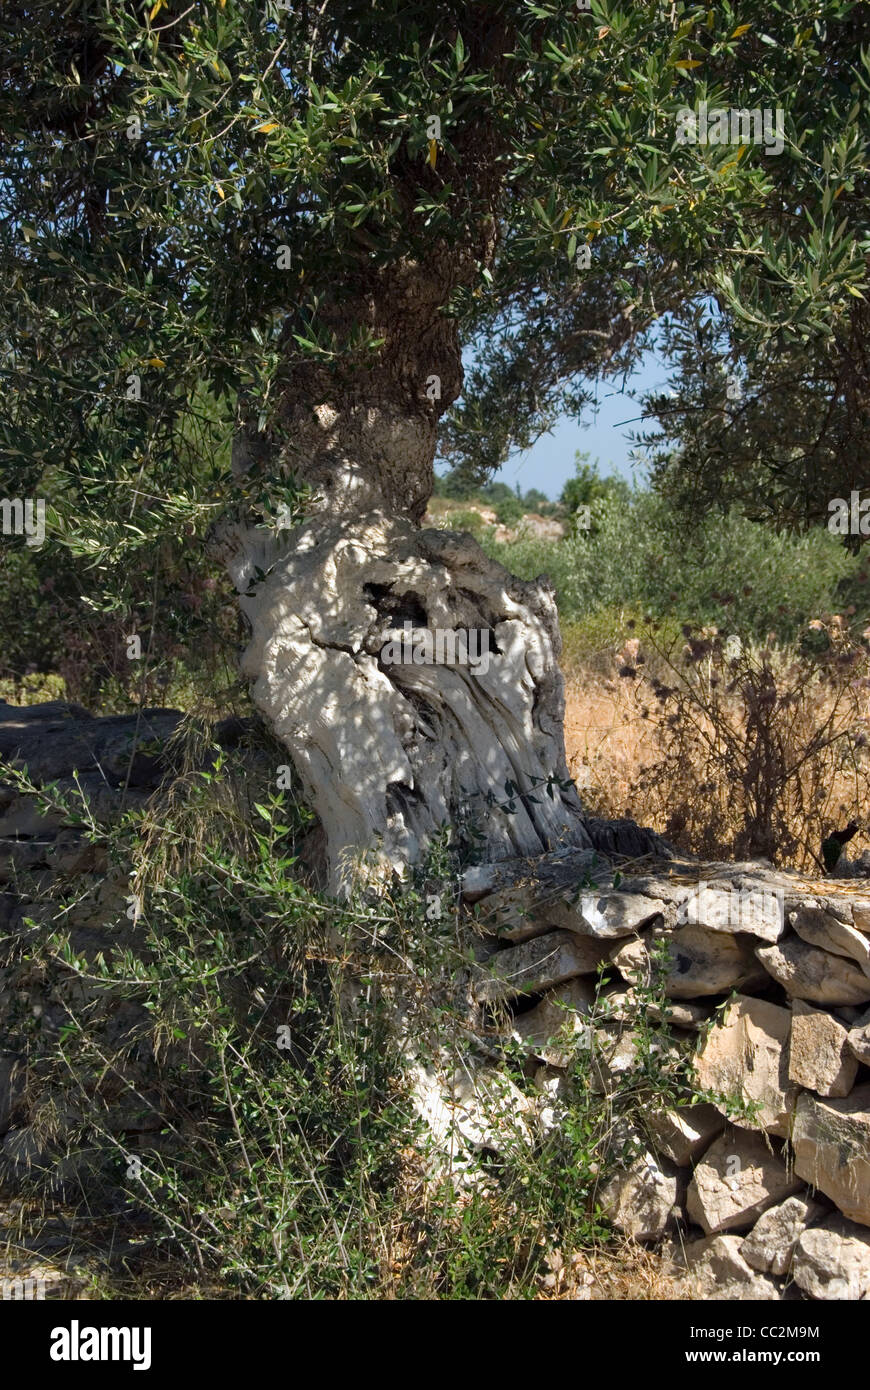 Gnarled ancient olive tree growing in stone wall in Crete Stock Photo